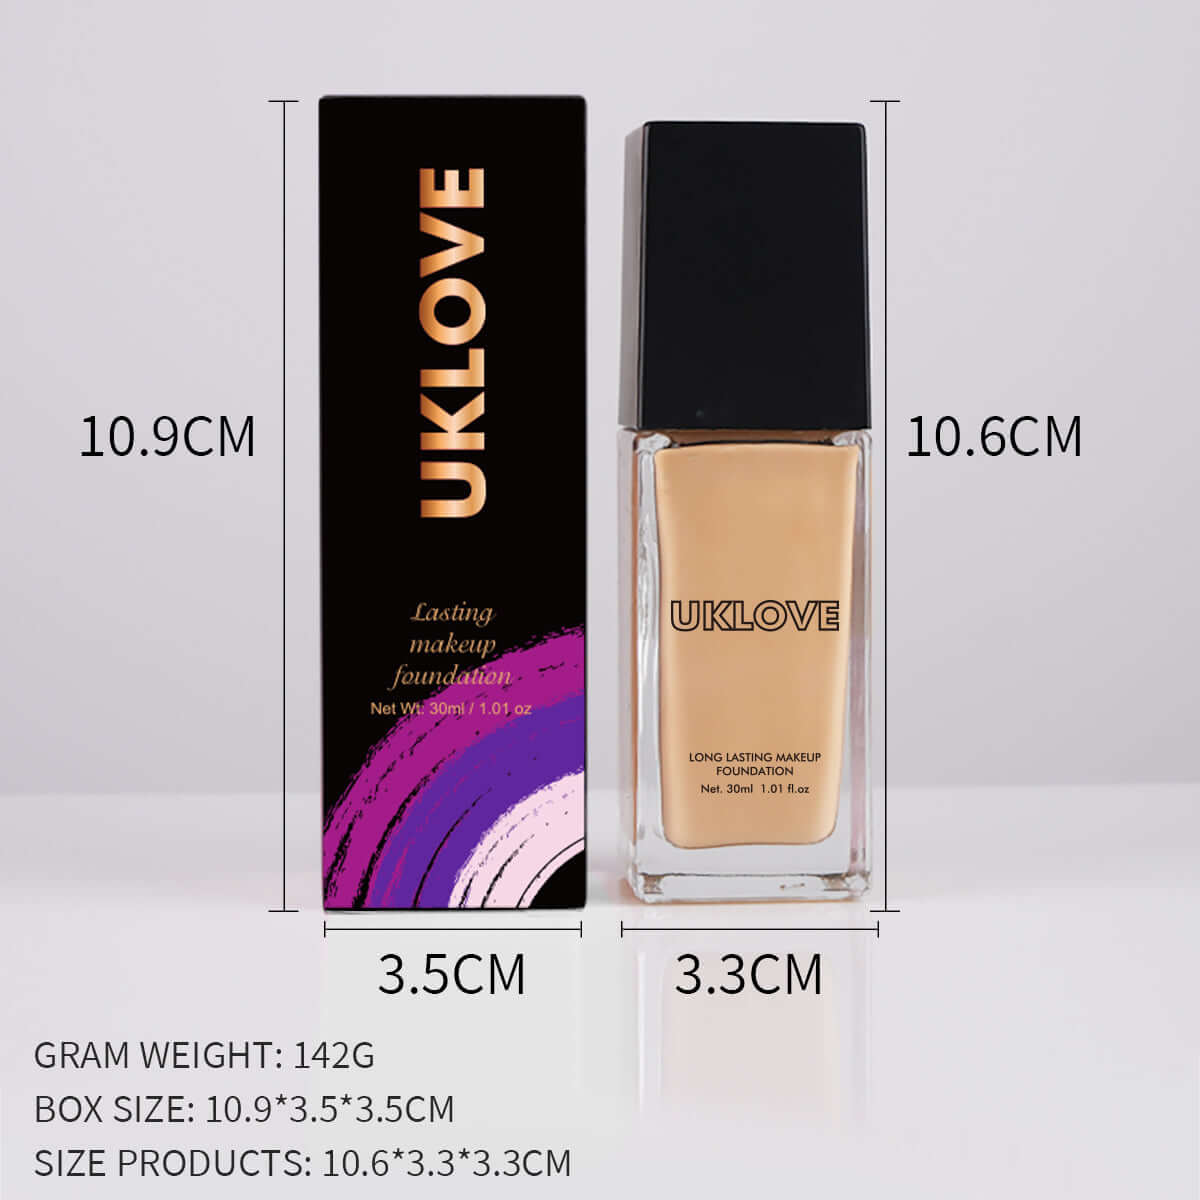 Sun-Kissed Beauty: UKLOVE Lasting Makeup Foundation with Best Sunbed Accelerator